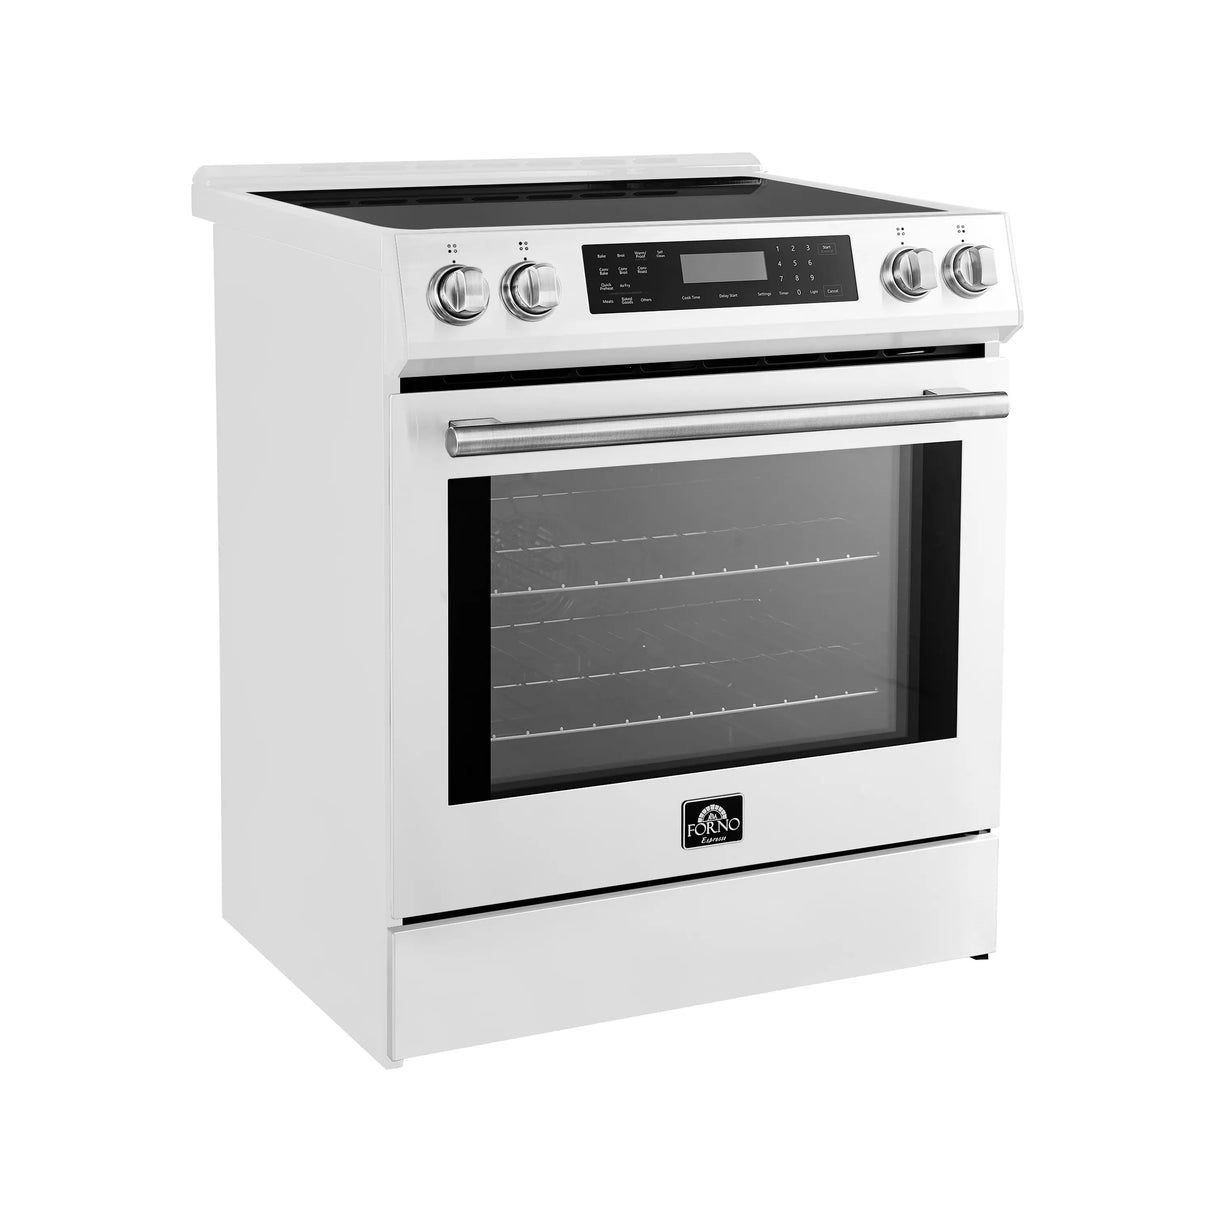 Forno Espresso Donatello 30-Inch Slide-In Induction Range in White with Stainless Steel Handle (FFSIN0905-30WHT)